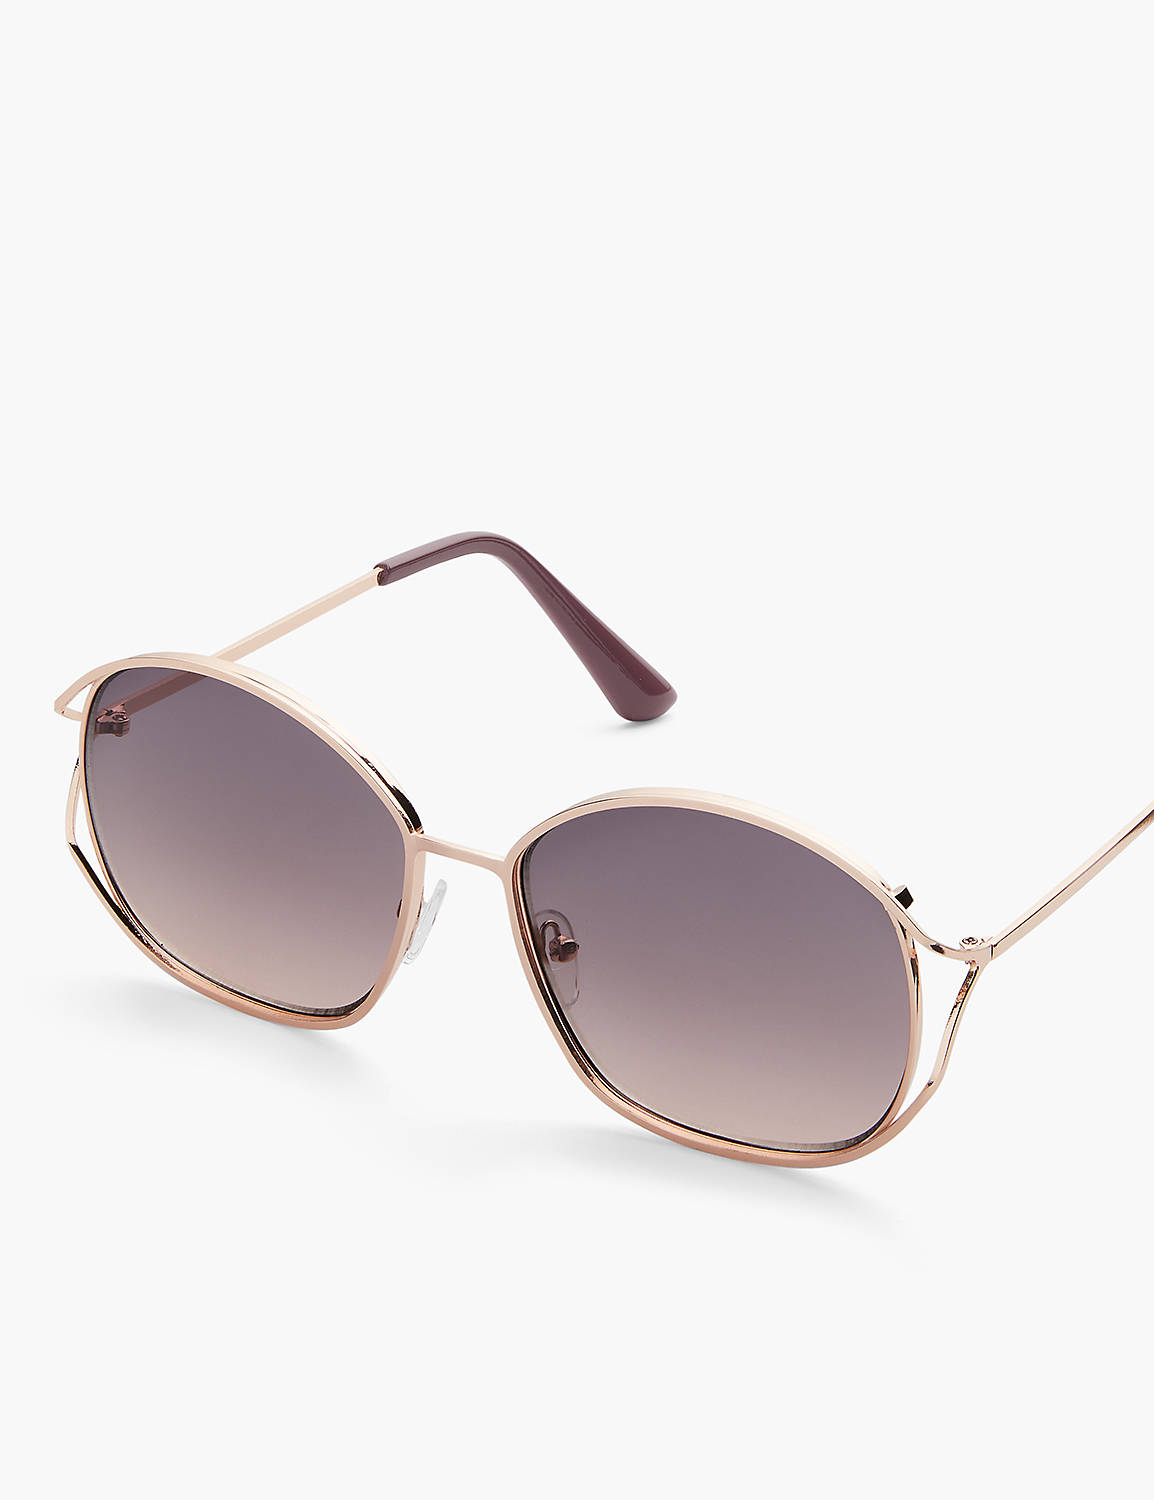 Metal Butterfly Sunglasses:TBD Rose Gold - TBD:ONESZ Product Image 1